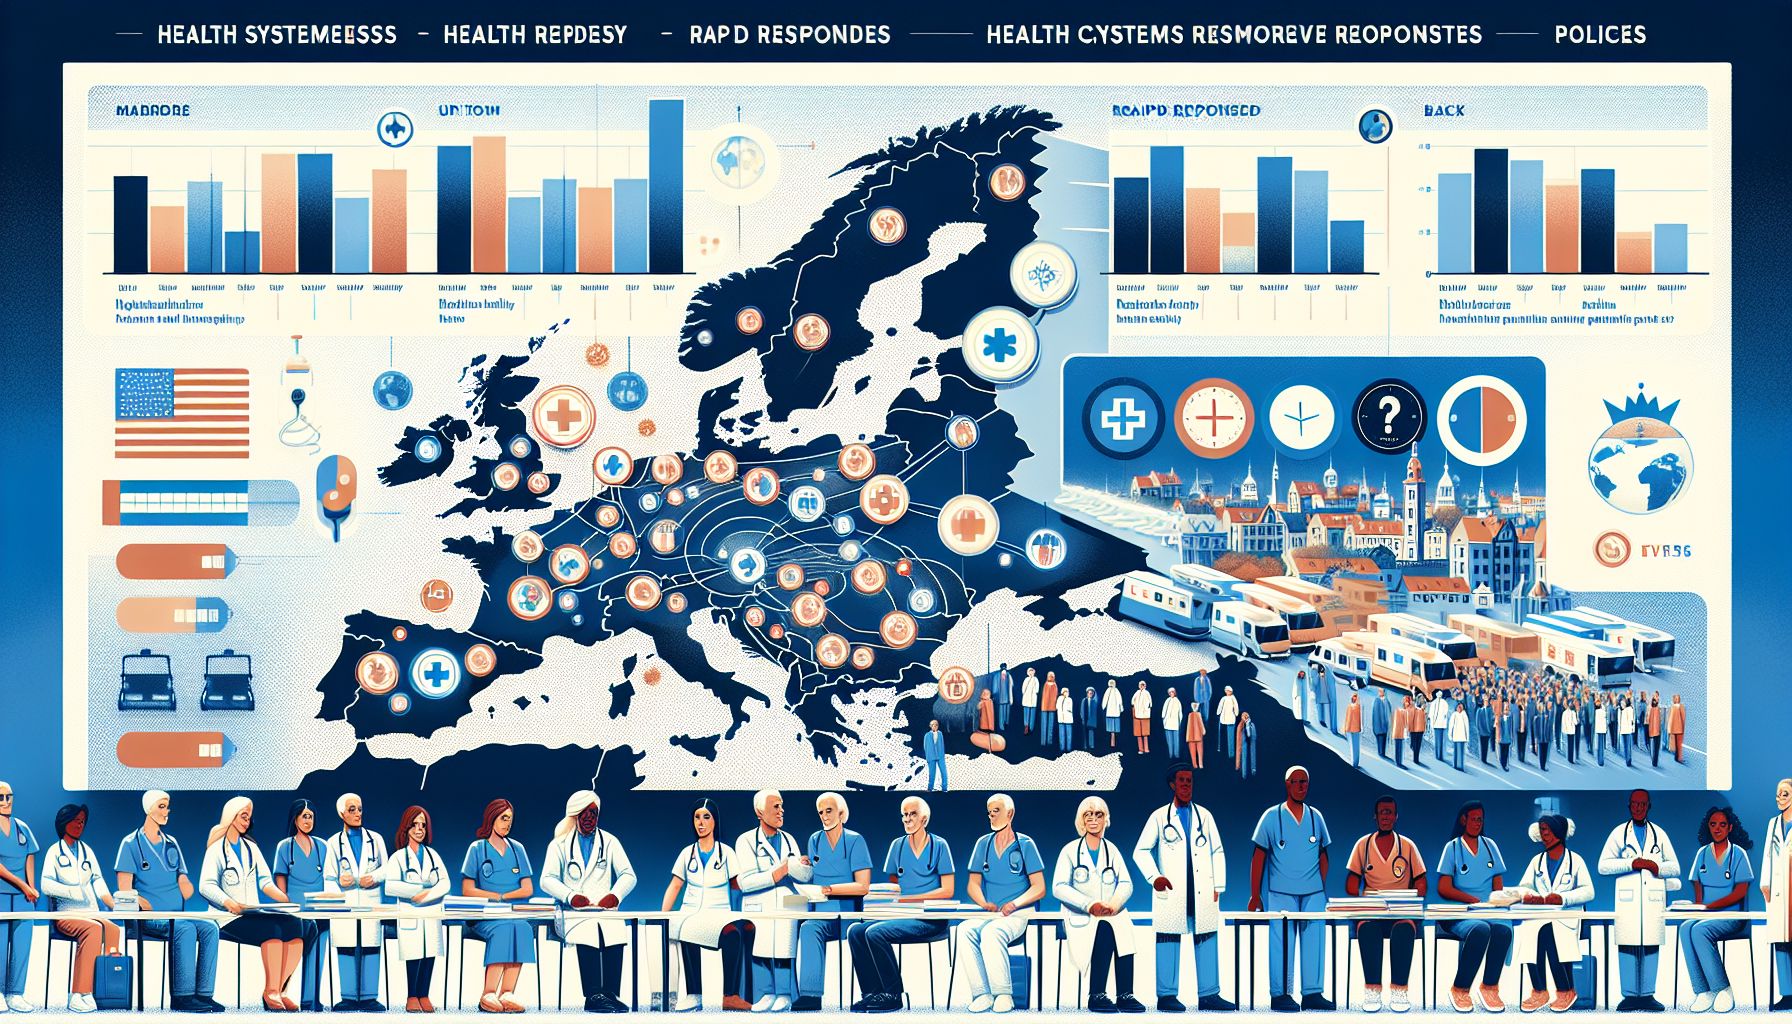 **The Preparedness and Response of European Health Systems**